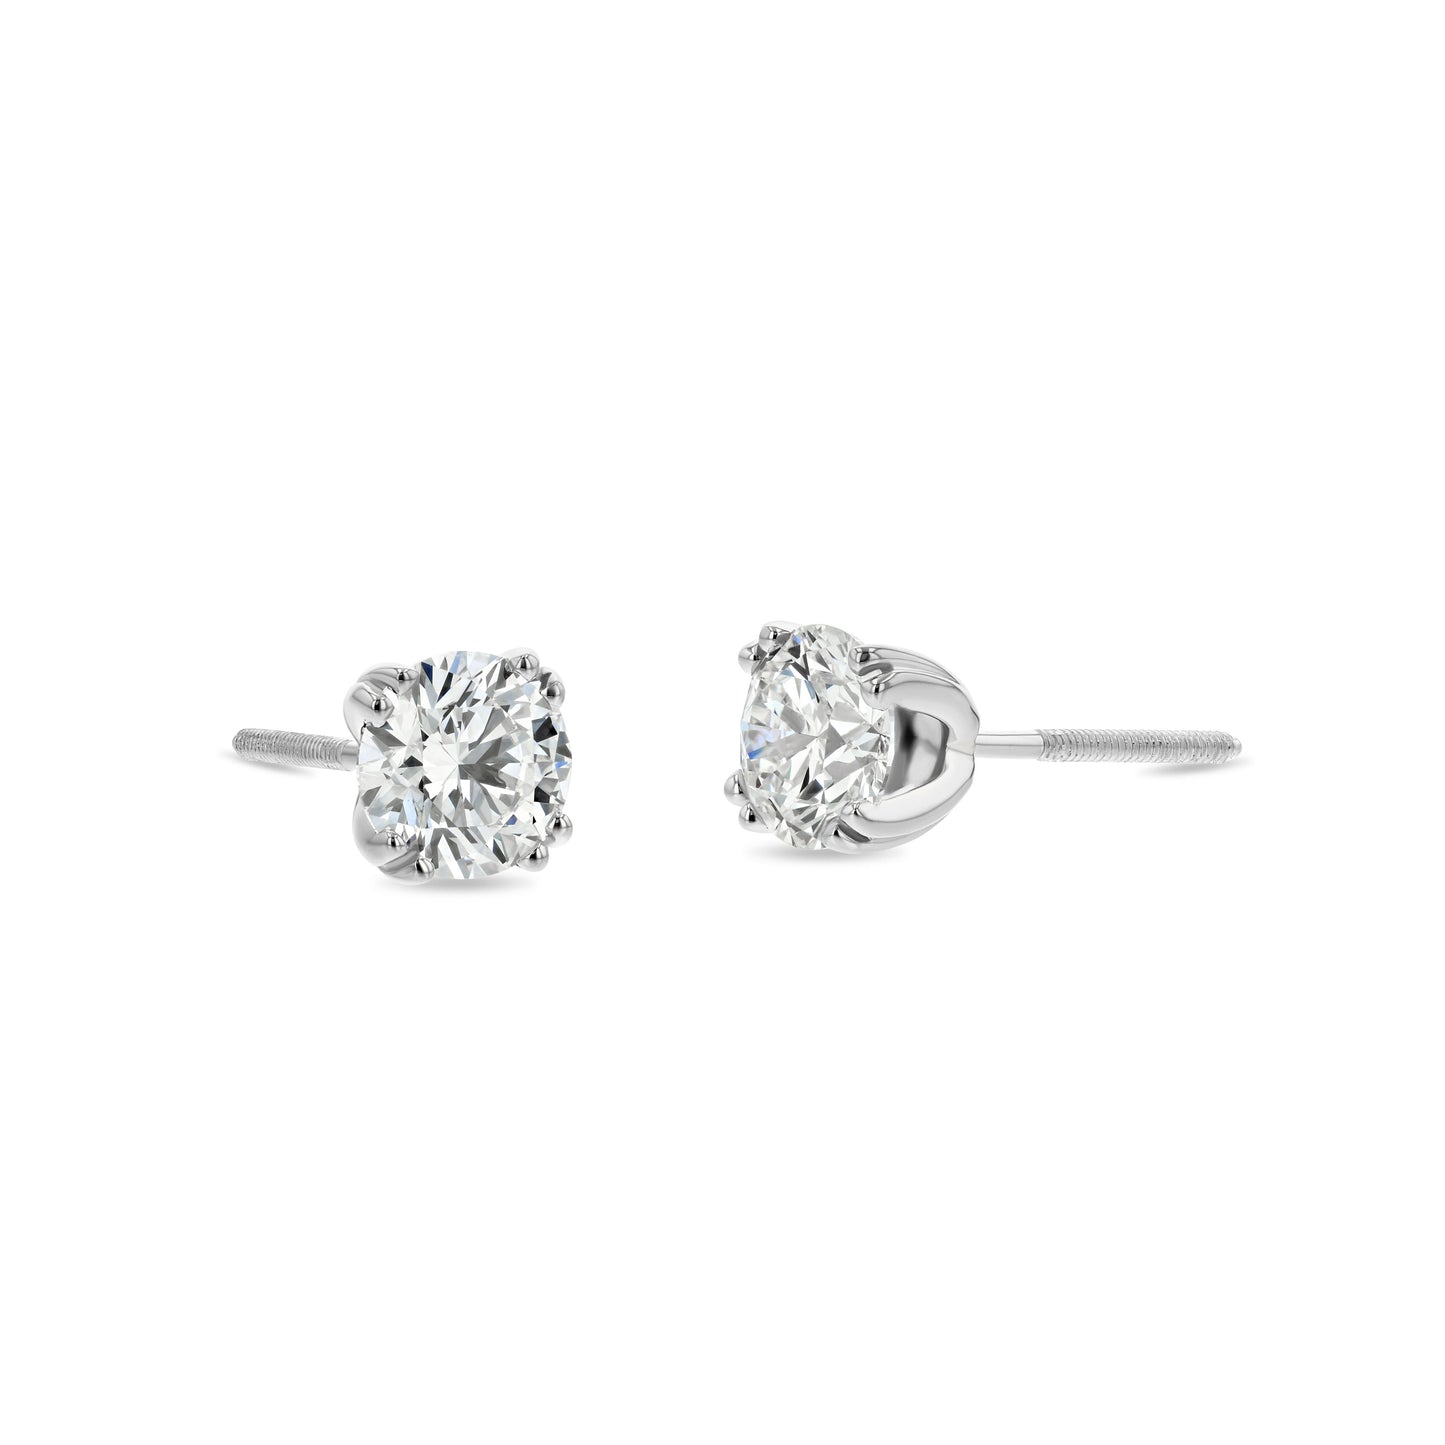 18k White Gold Double Prong Round Diamond Stud Earrings 1/2ctw (4.1mm Ea), M-n Color, Si2-si3 Clarity